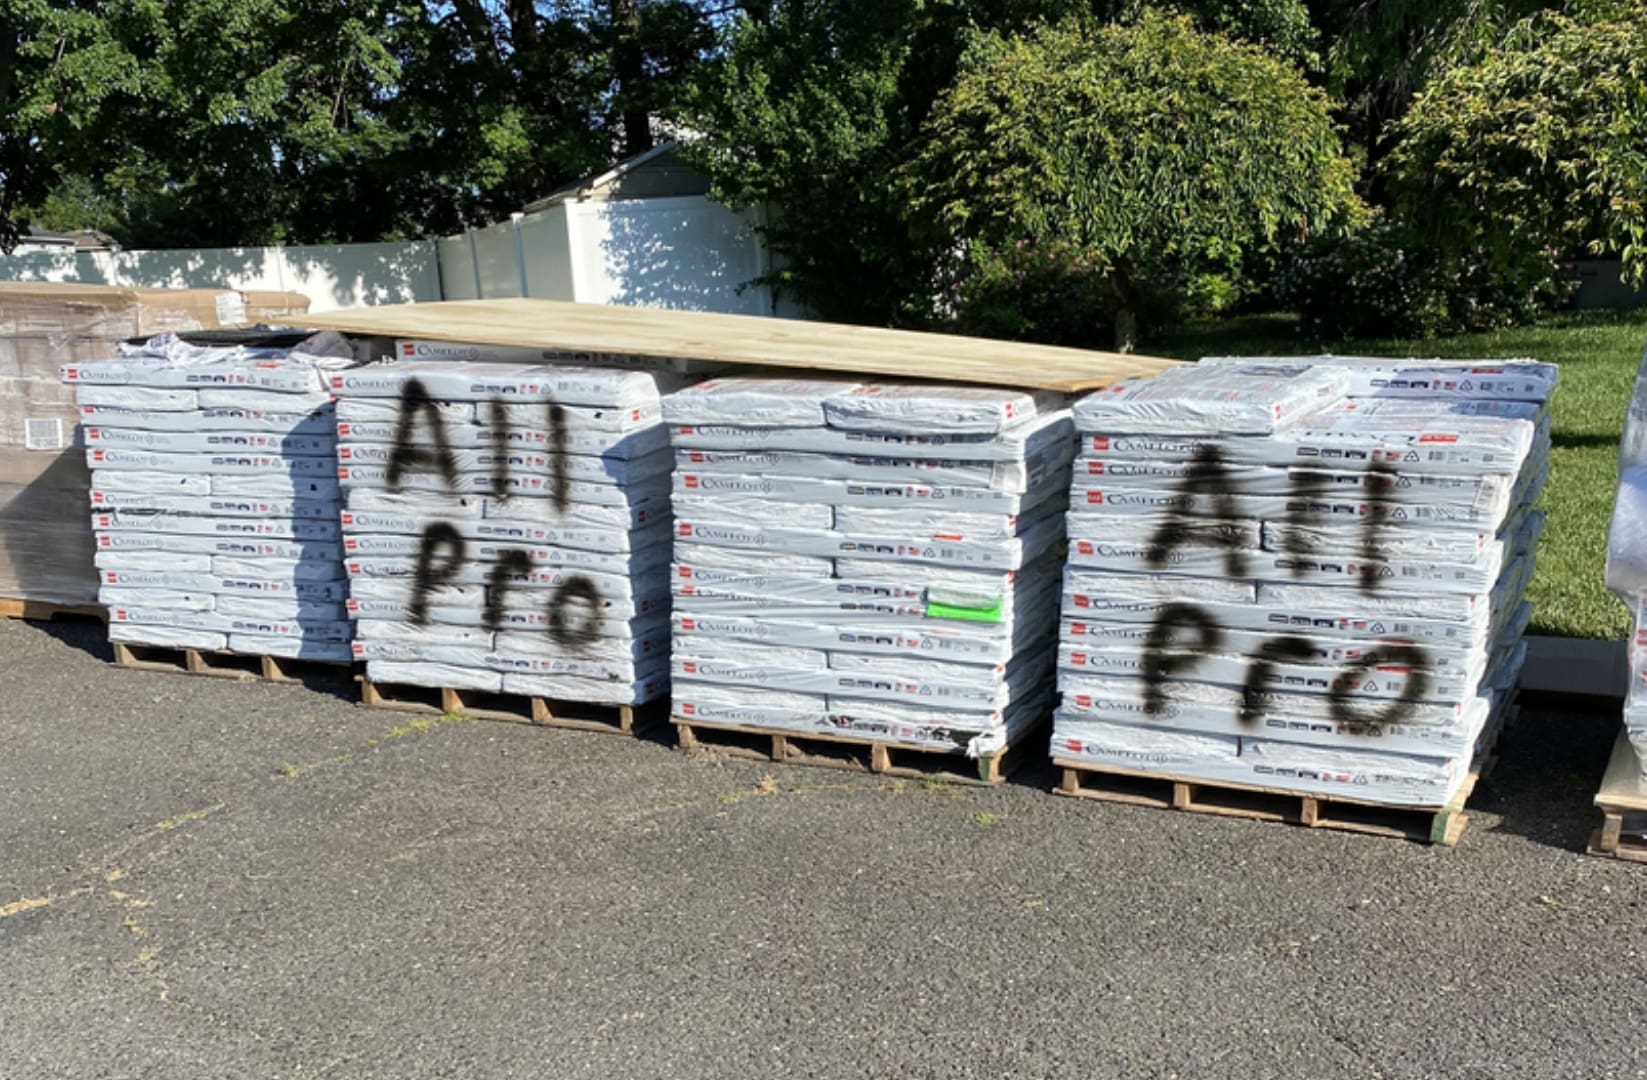 A row of stacks of papers with the words " all pro ".